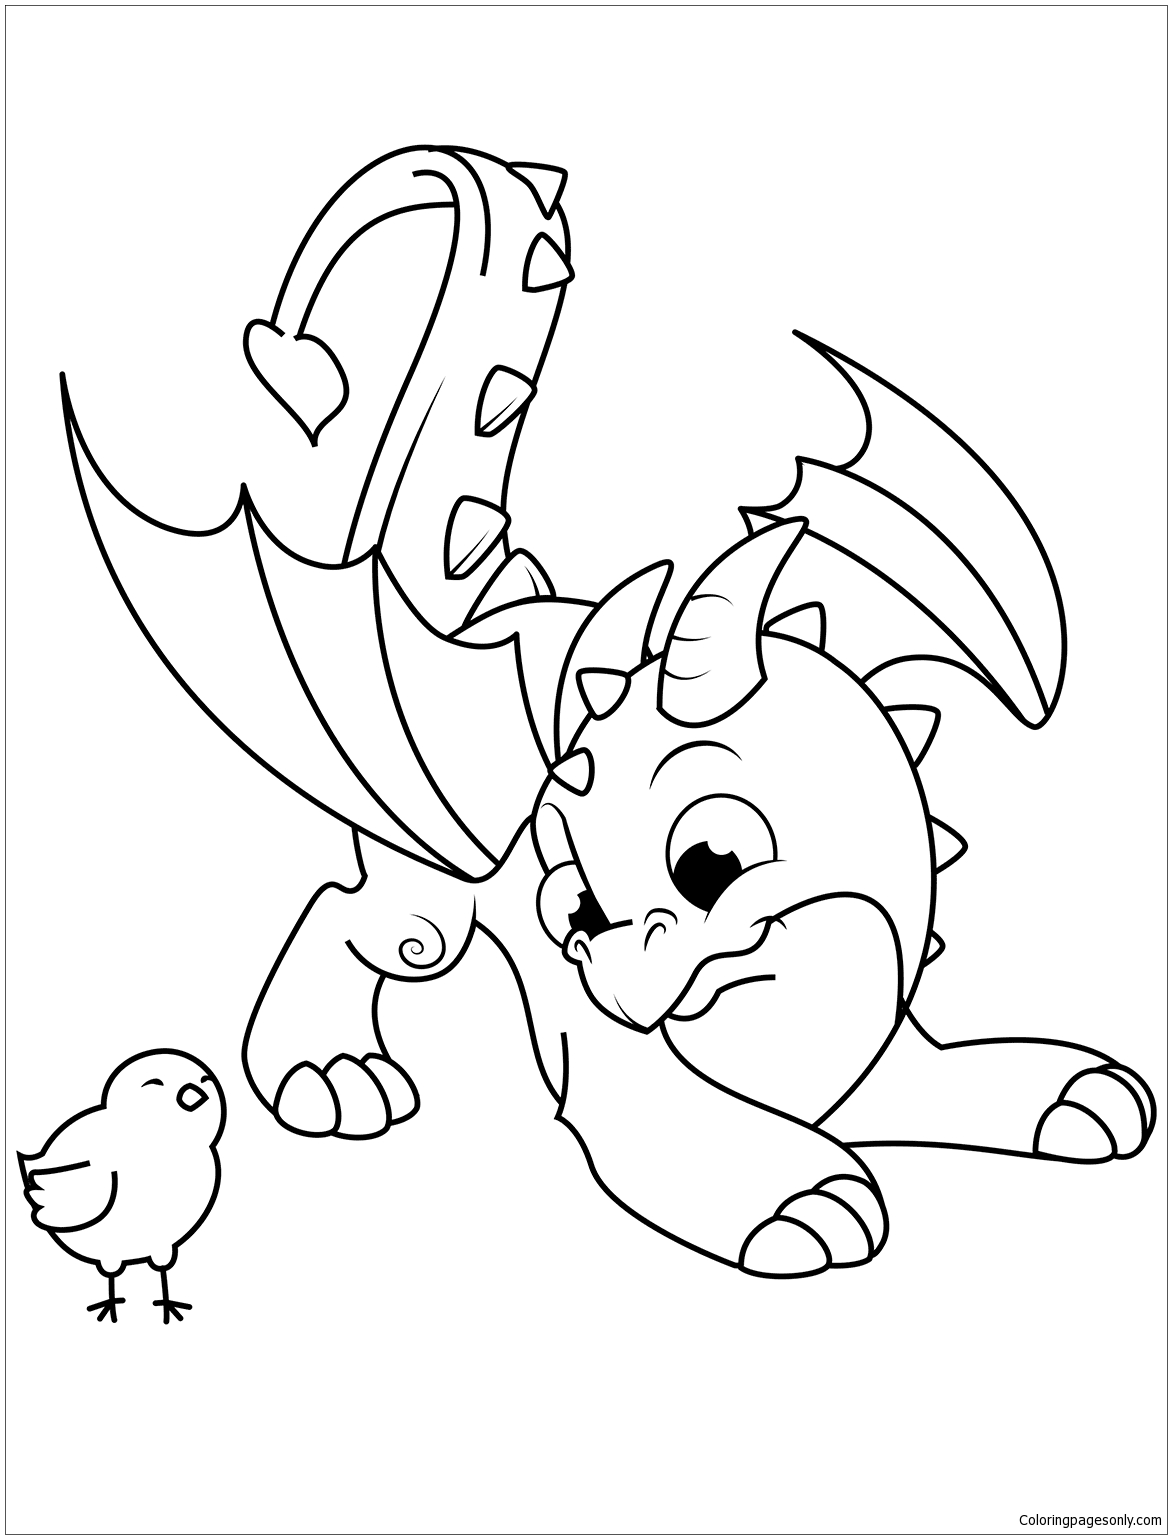 dragons cute coloring page